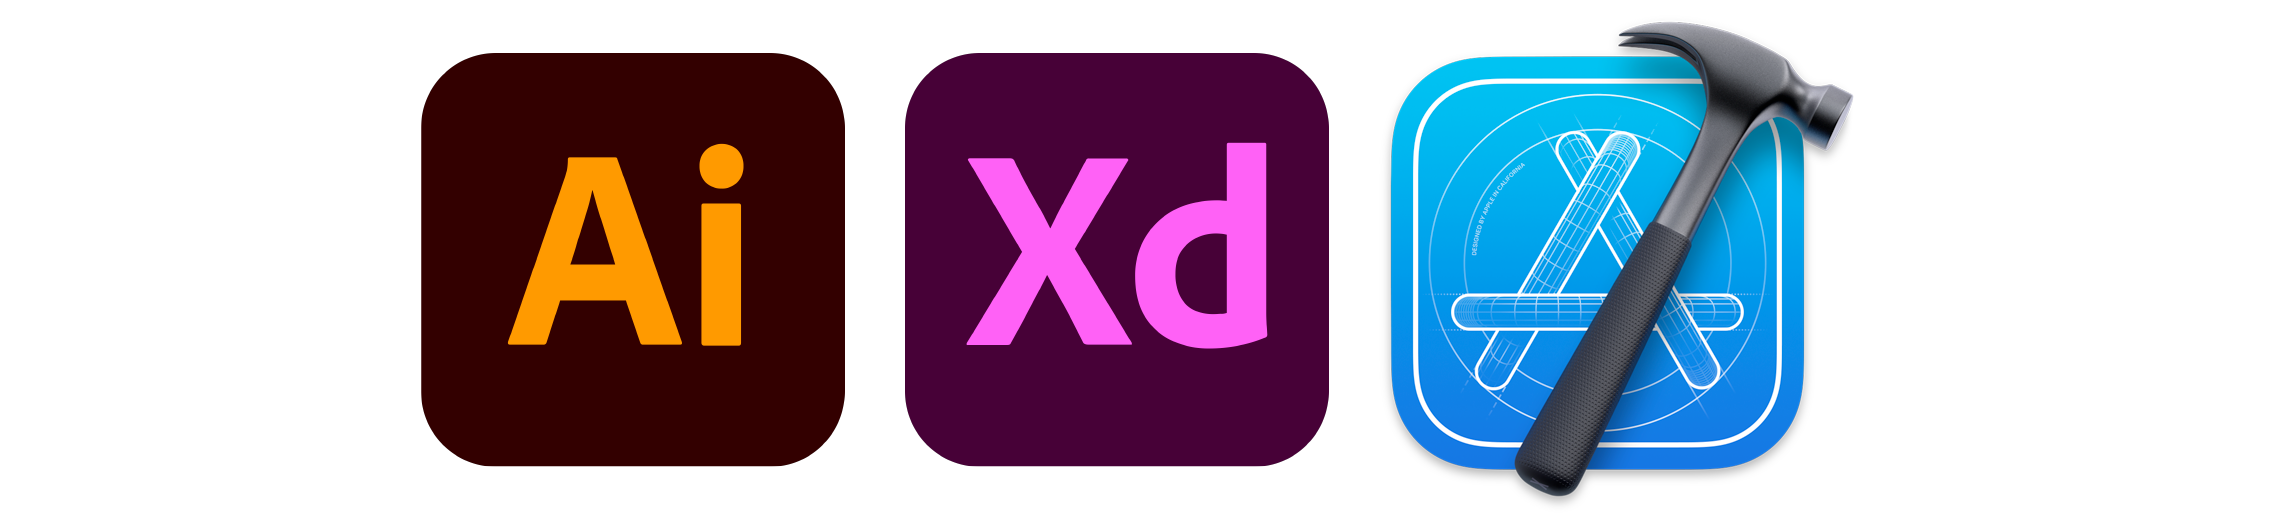 Adobe XD, Illustrator, and Xcode Softwares